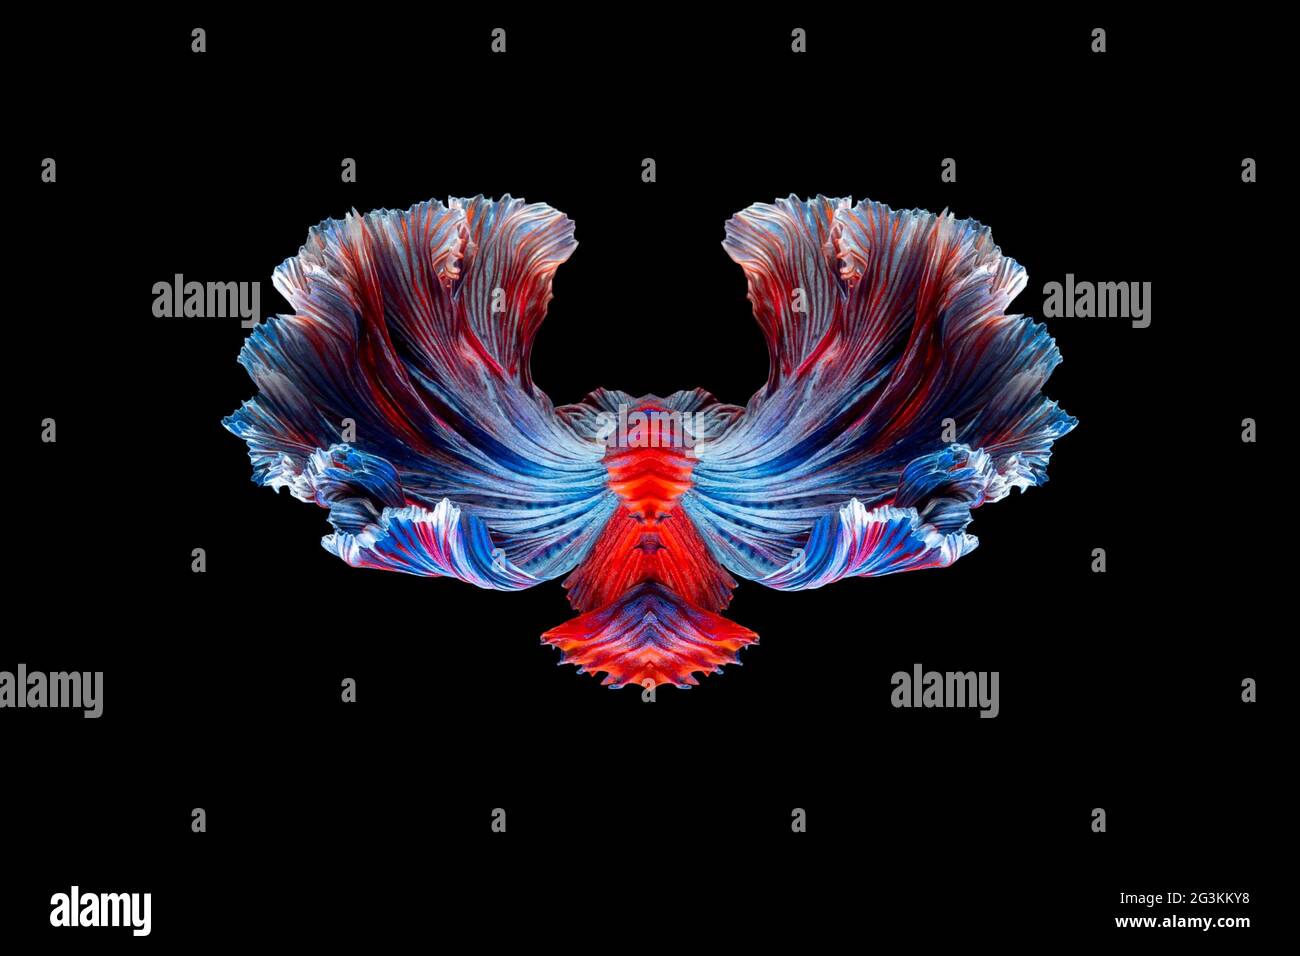 Abstract art of siamese fighting fish or betta fish tails symmetry form background Stock Photo